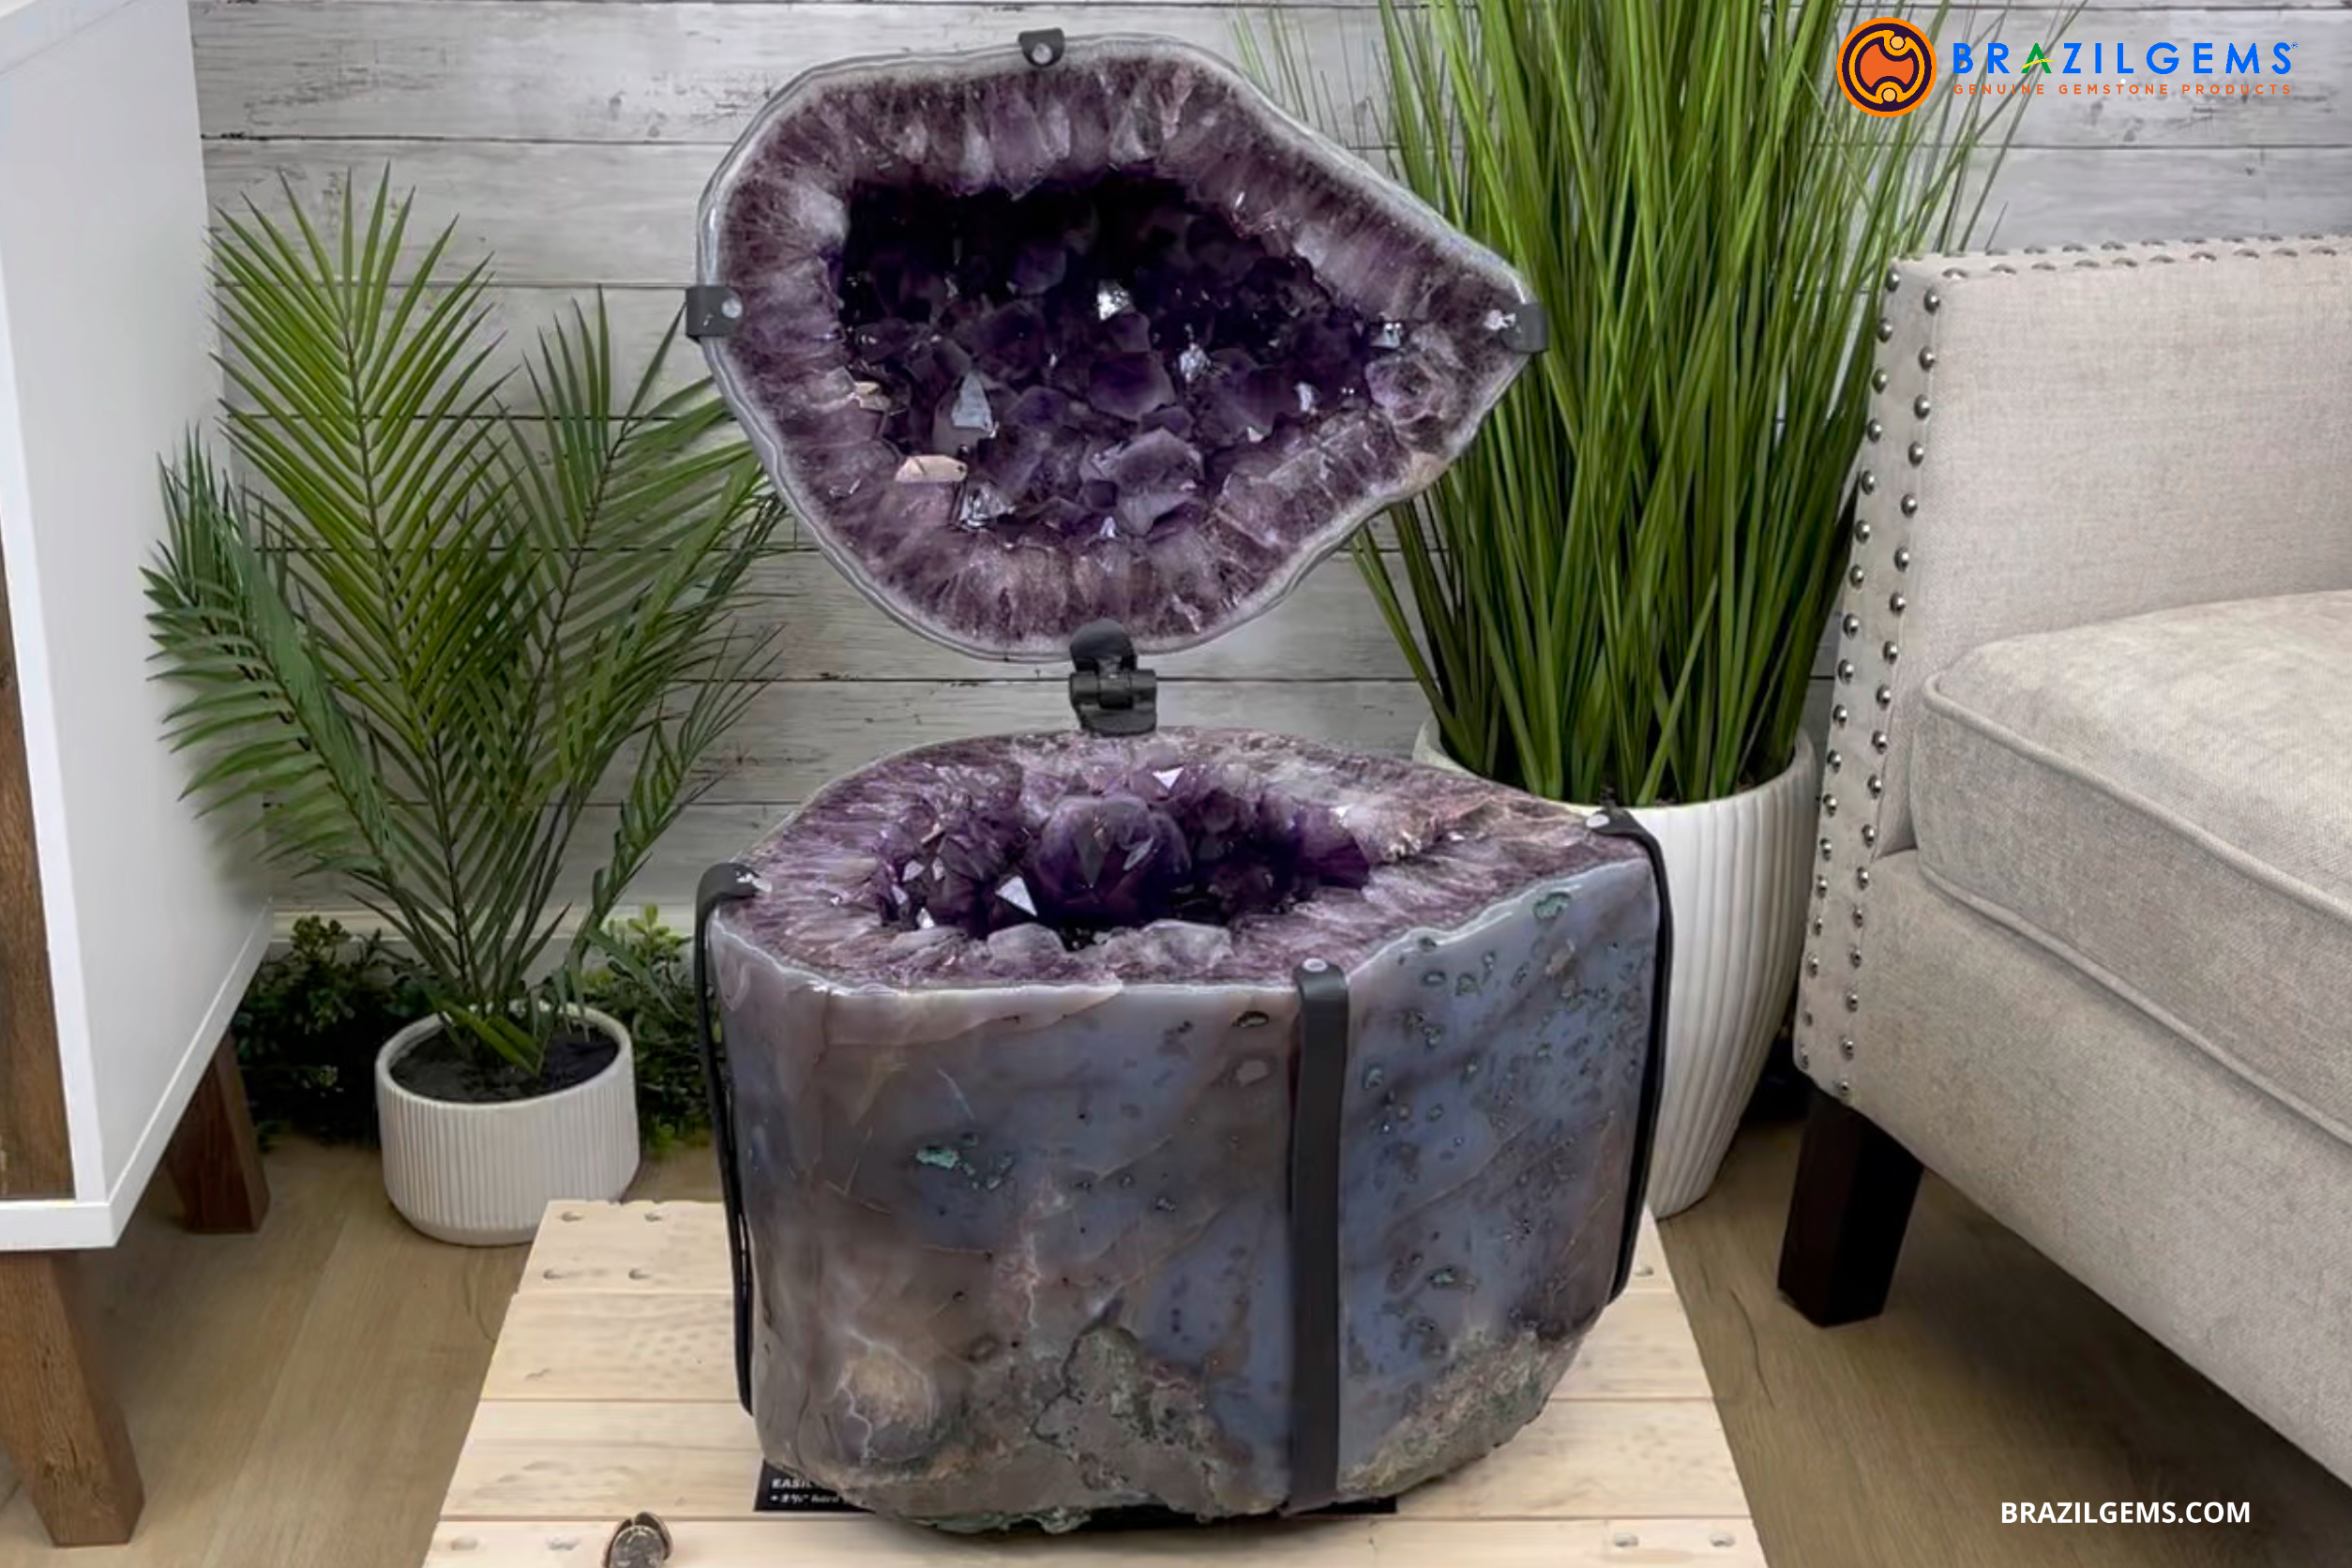 GEODE "JEWELRY BOXES"